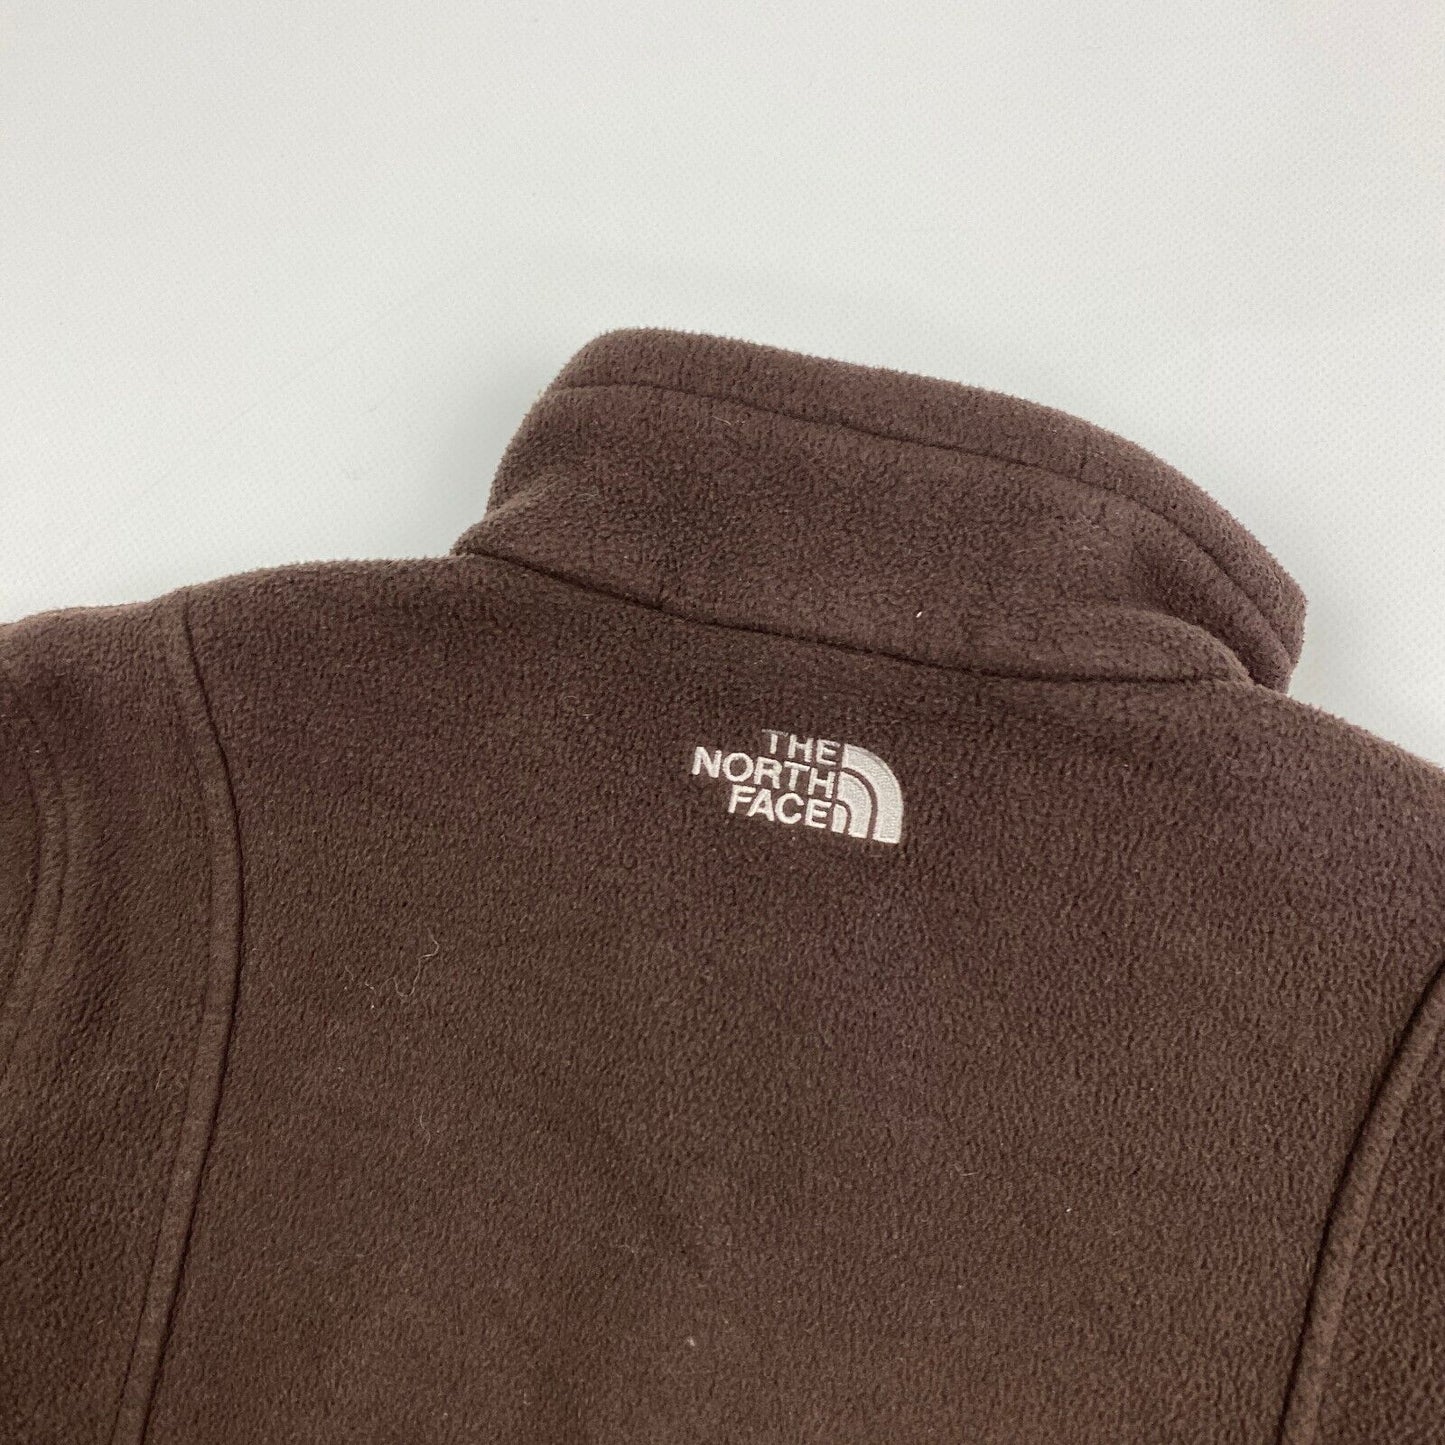 VINTAGE The North Face Brown Fleece Sweater sz Small Girls Youth